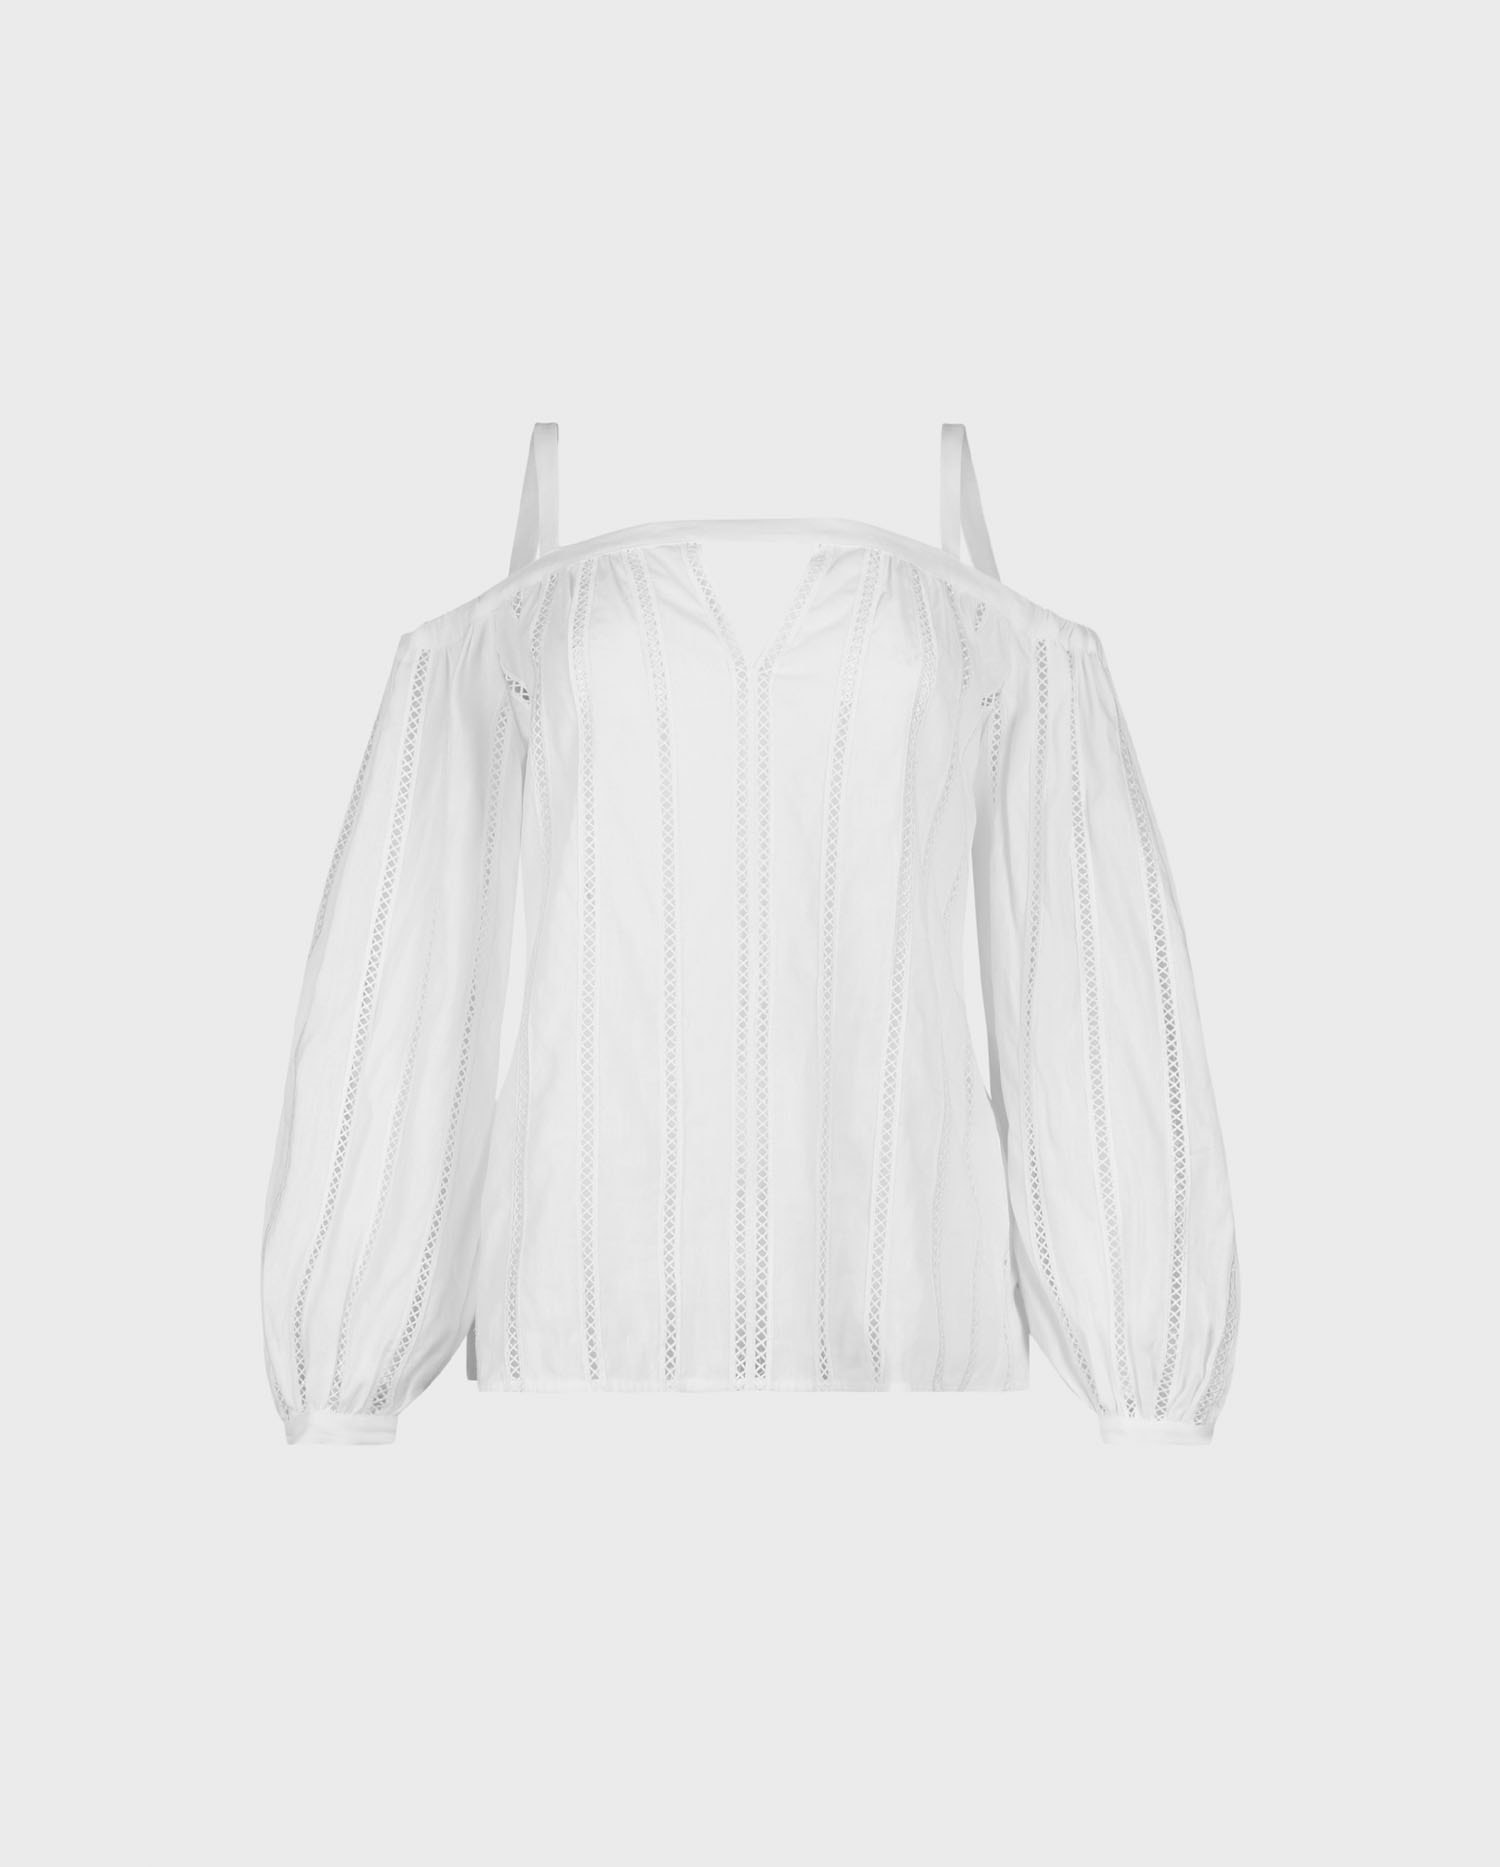 White Linen off the Shoulder Lattice Embroidery Top